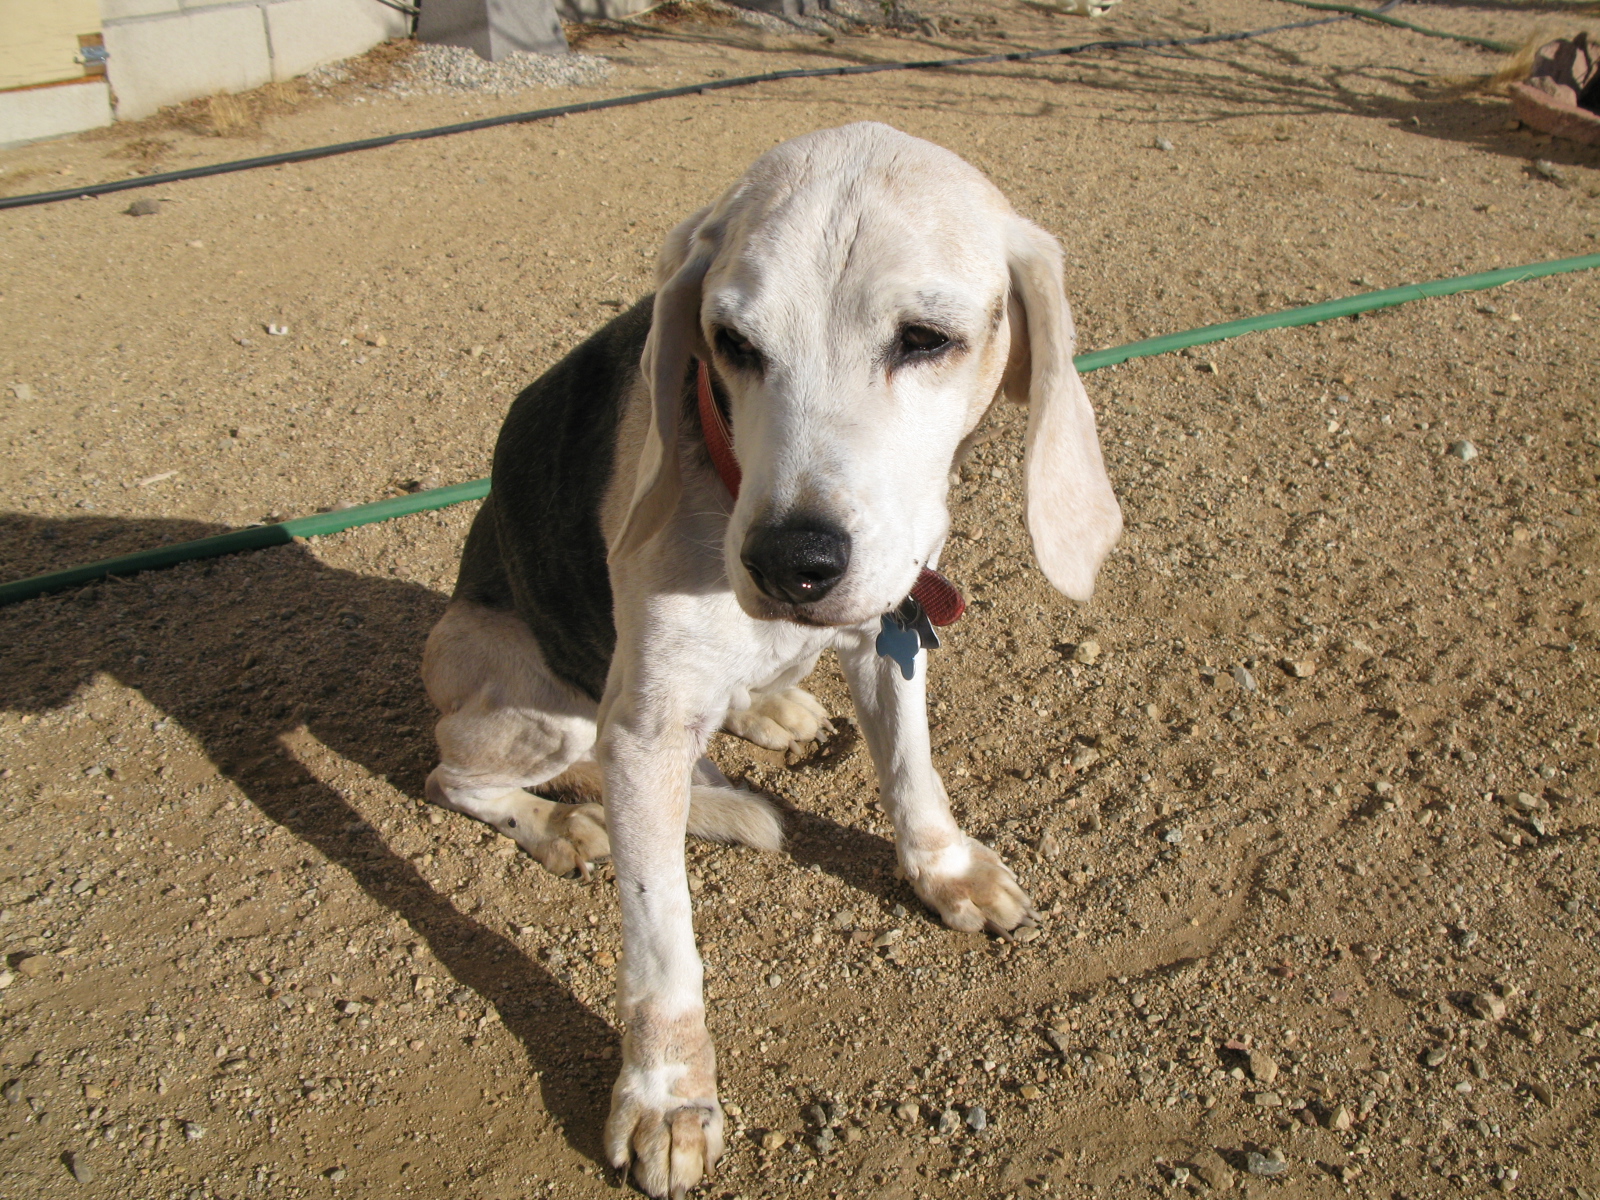 a white dog is tied up with a leash